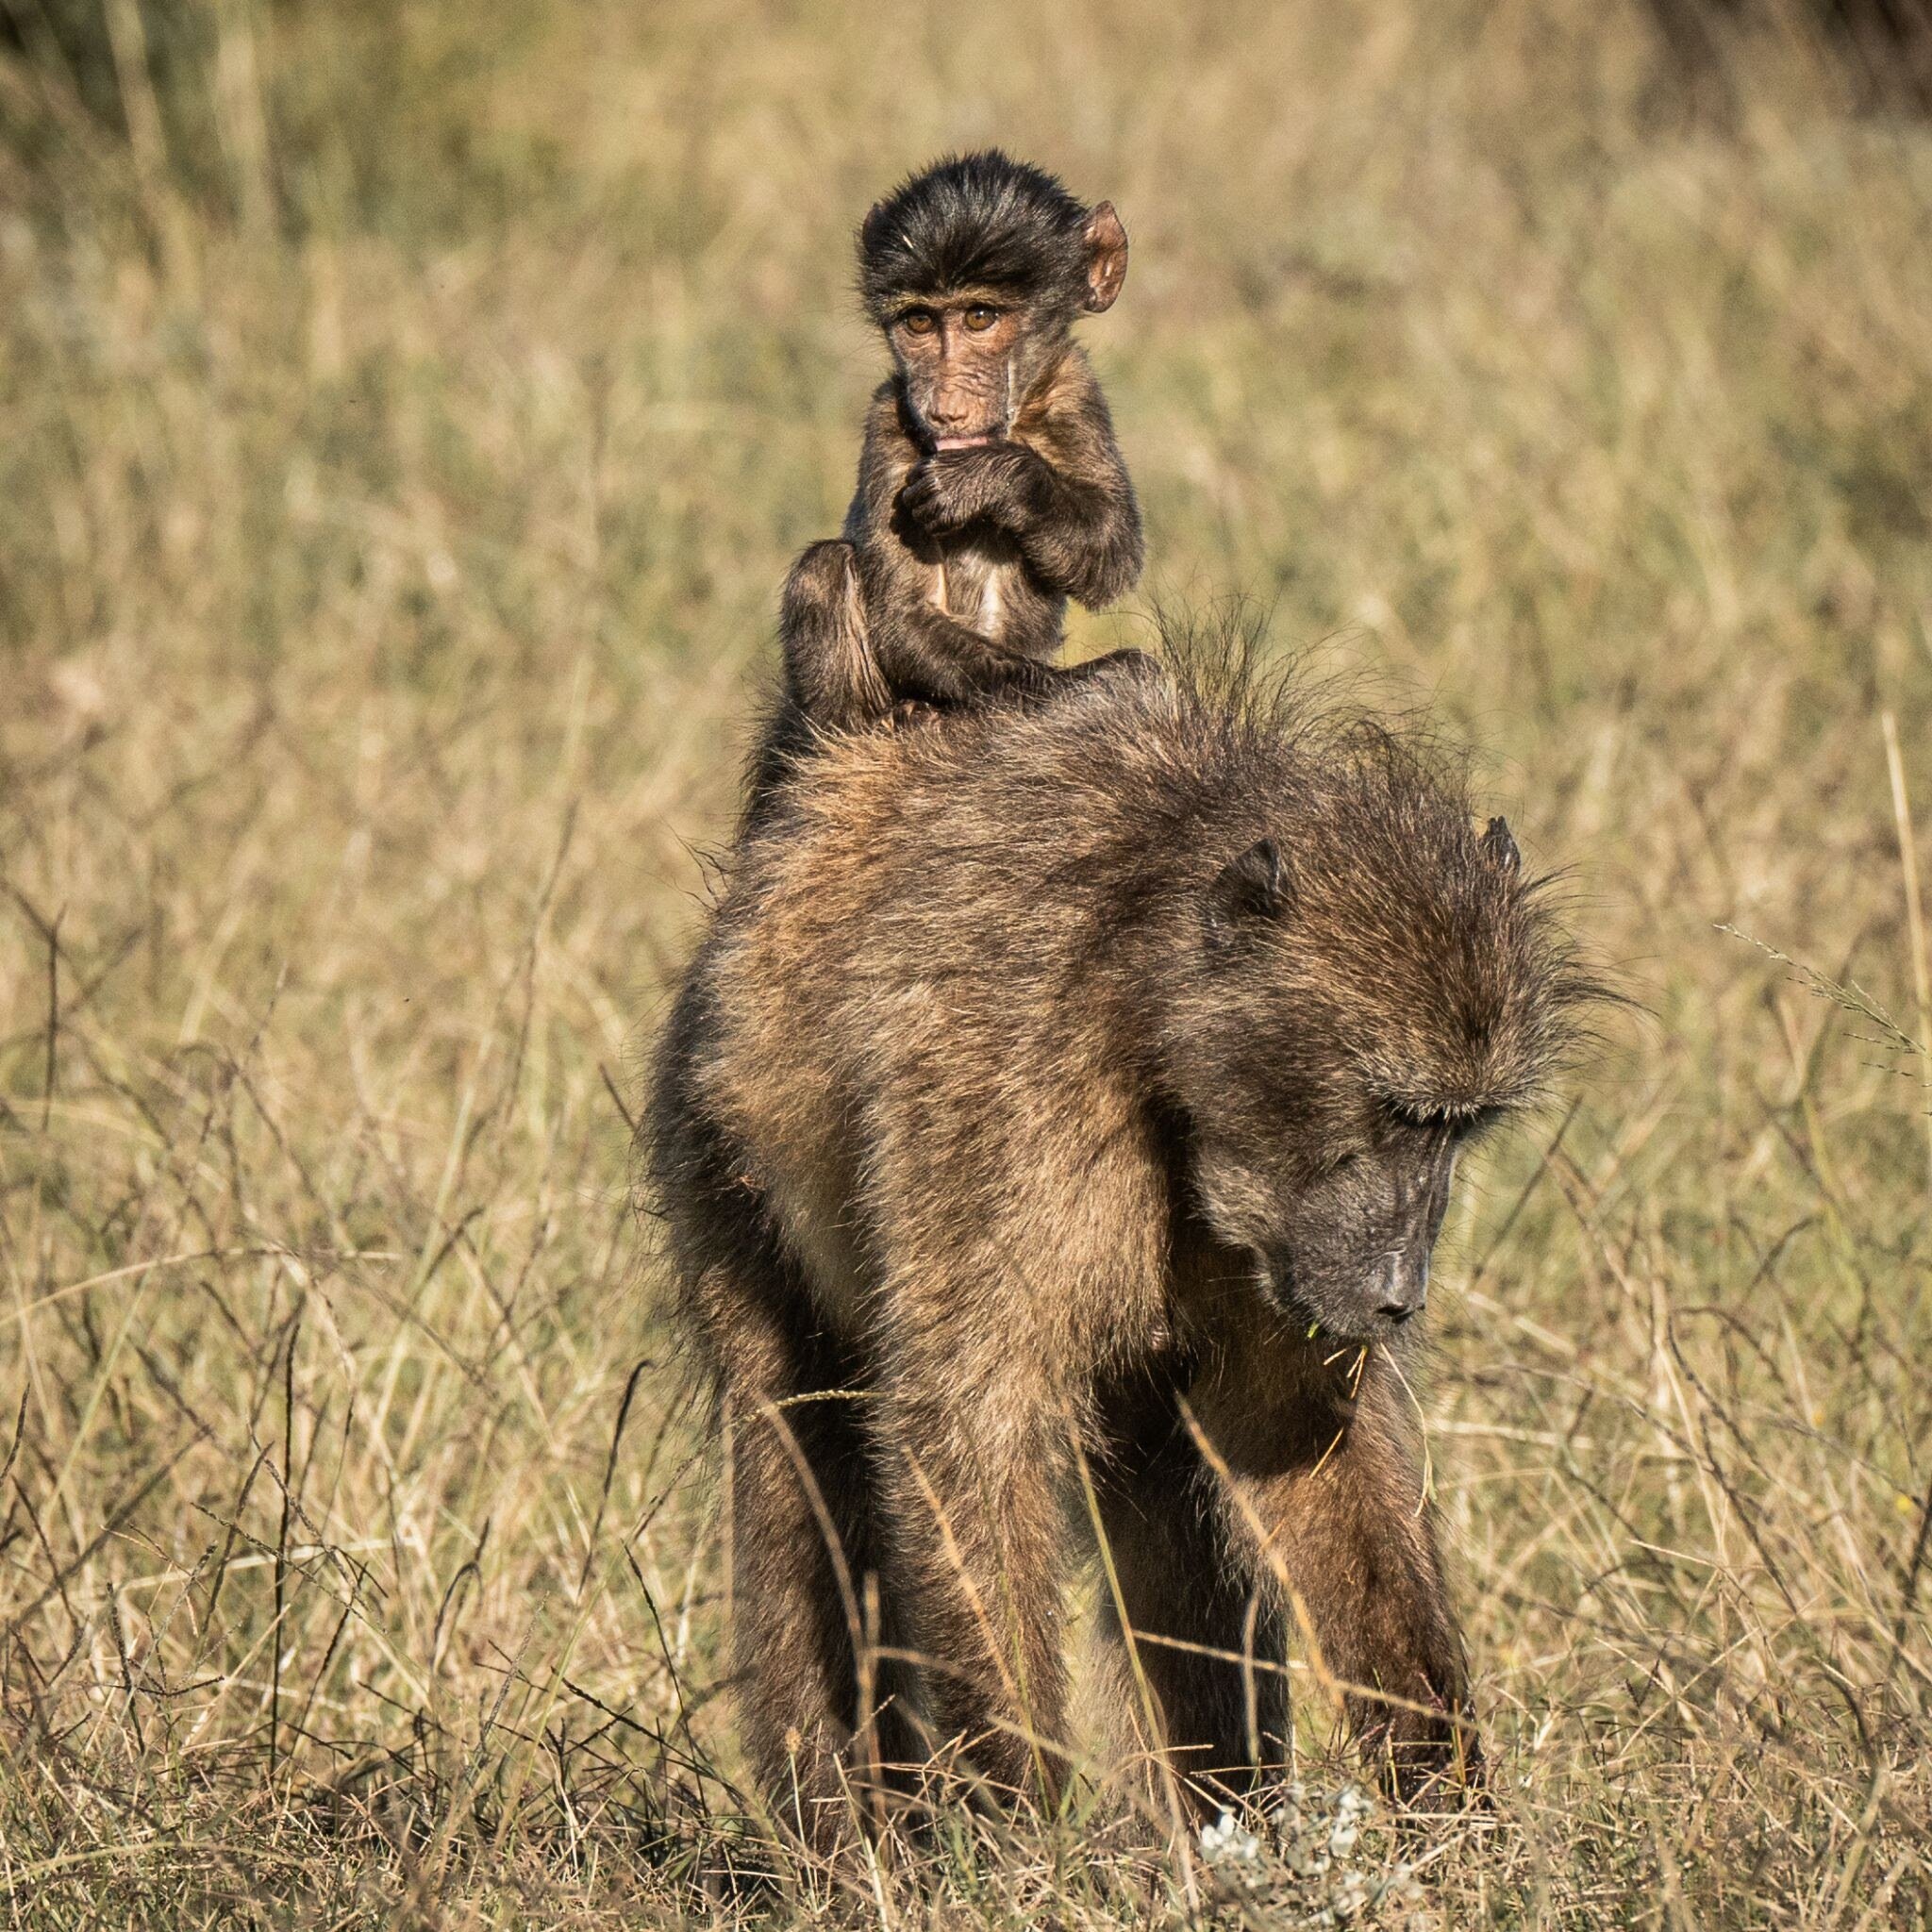 WYLD Mother &amp; Child of the Week: Hitching a Ride!

Riding on the mother baboon's back provides the baboon infant with a vantage point from which to observe the world, learn about its surroundings, and watch the mother's behaviors to learn and mim